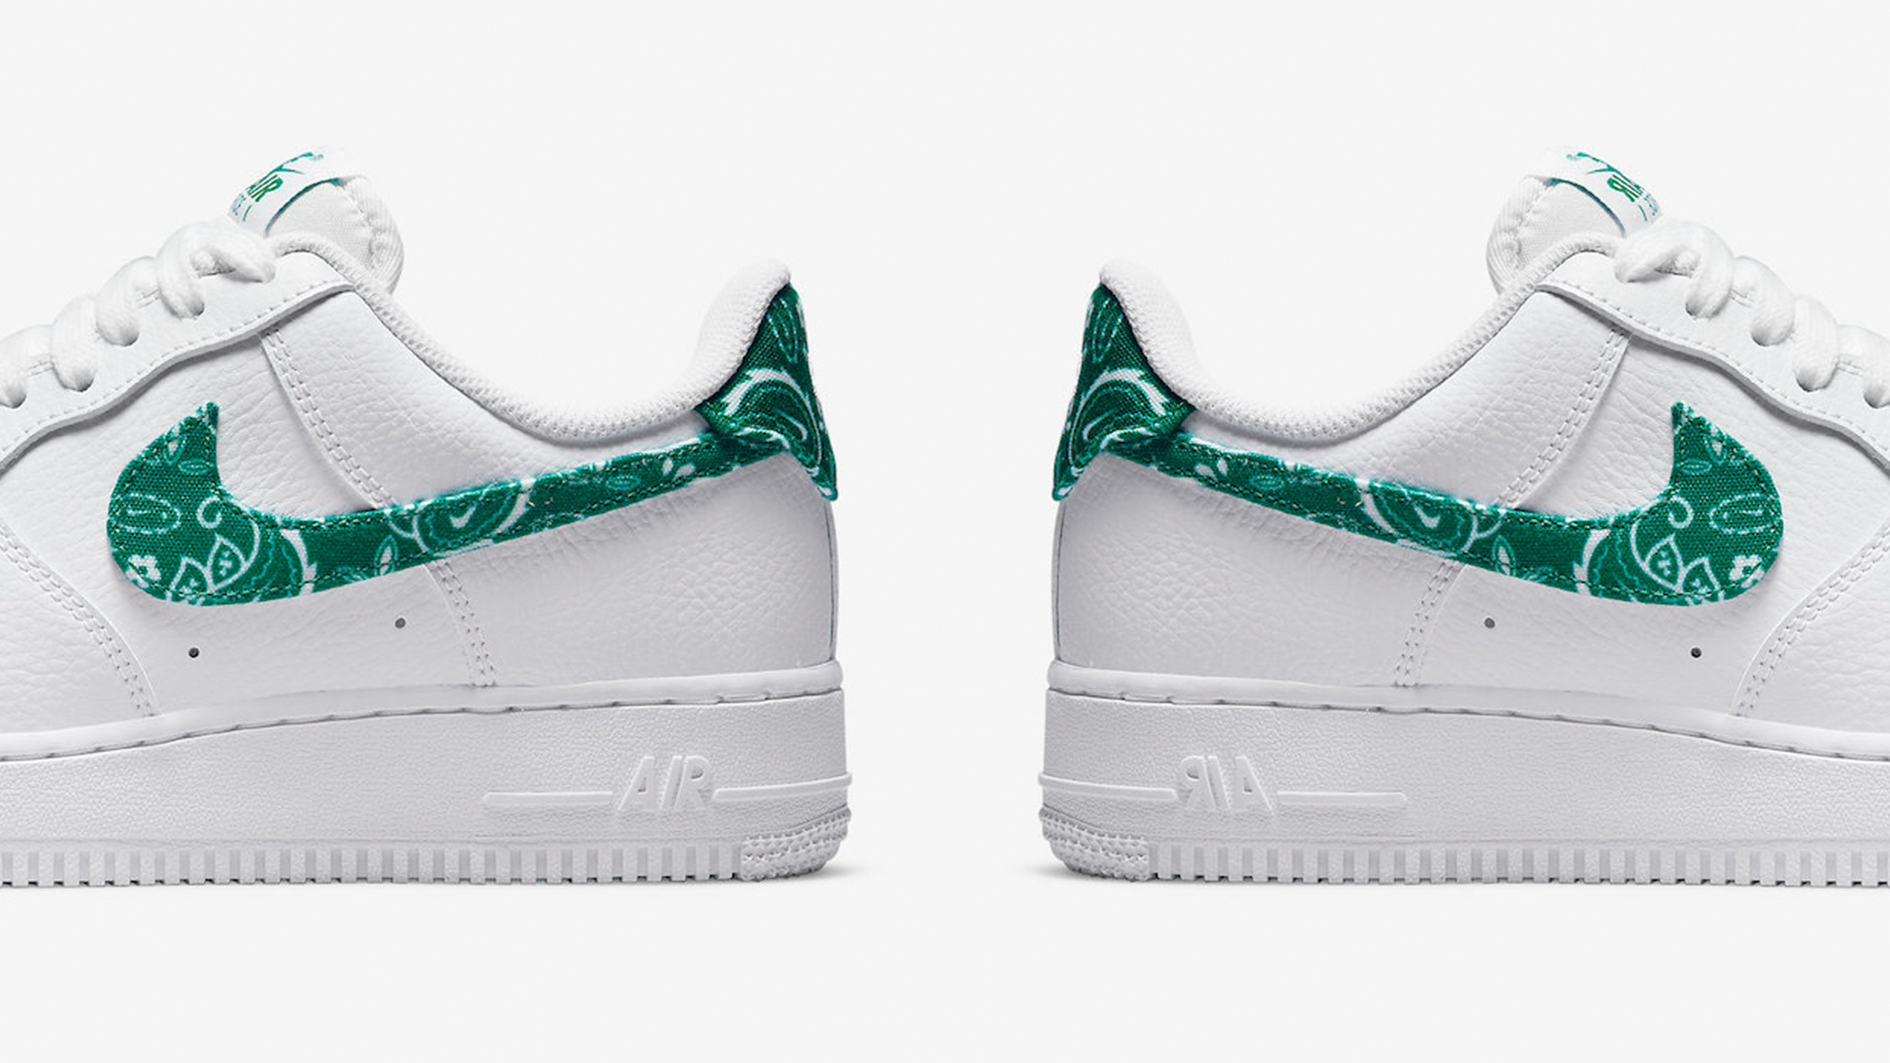 The Nike Air Force 1 Paisley Pack is Completed With a 